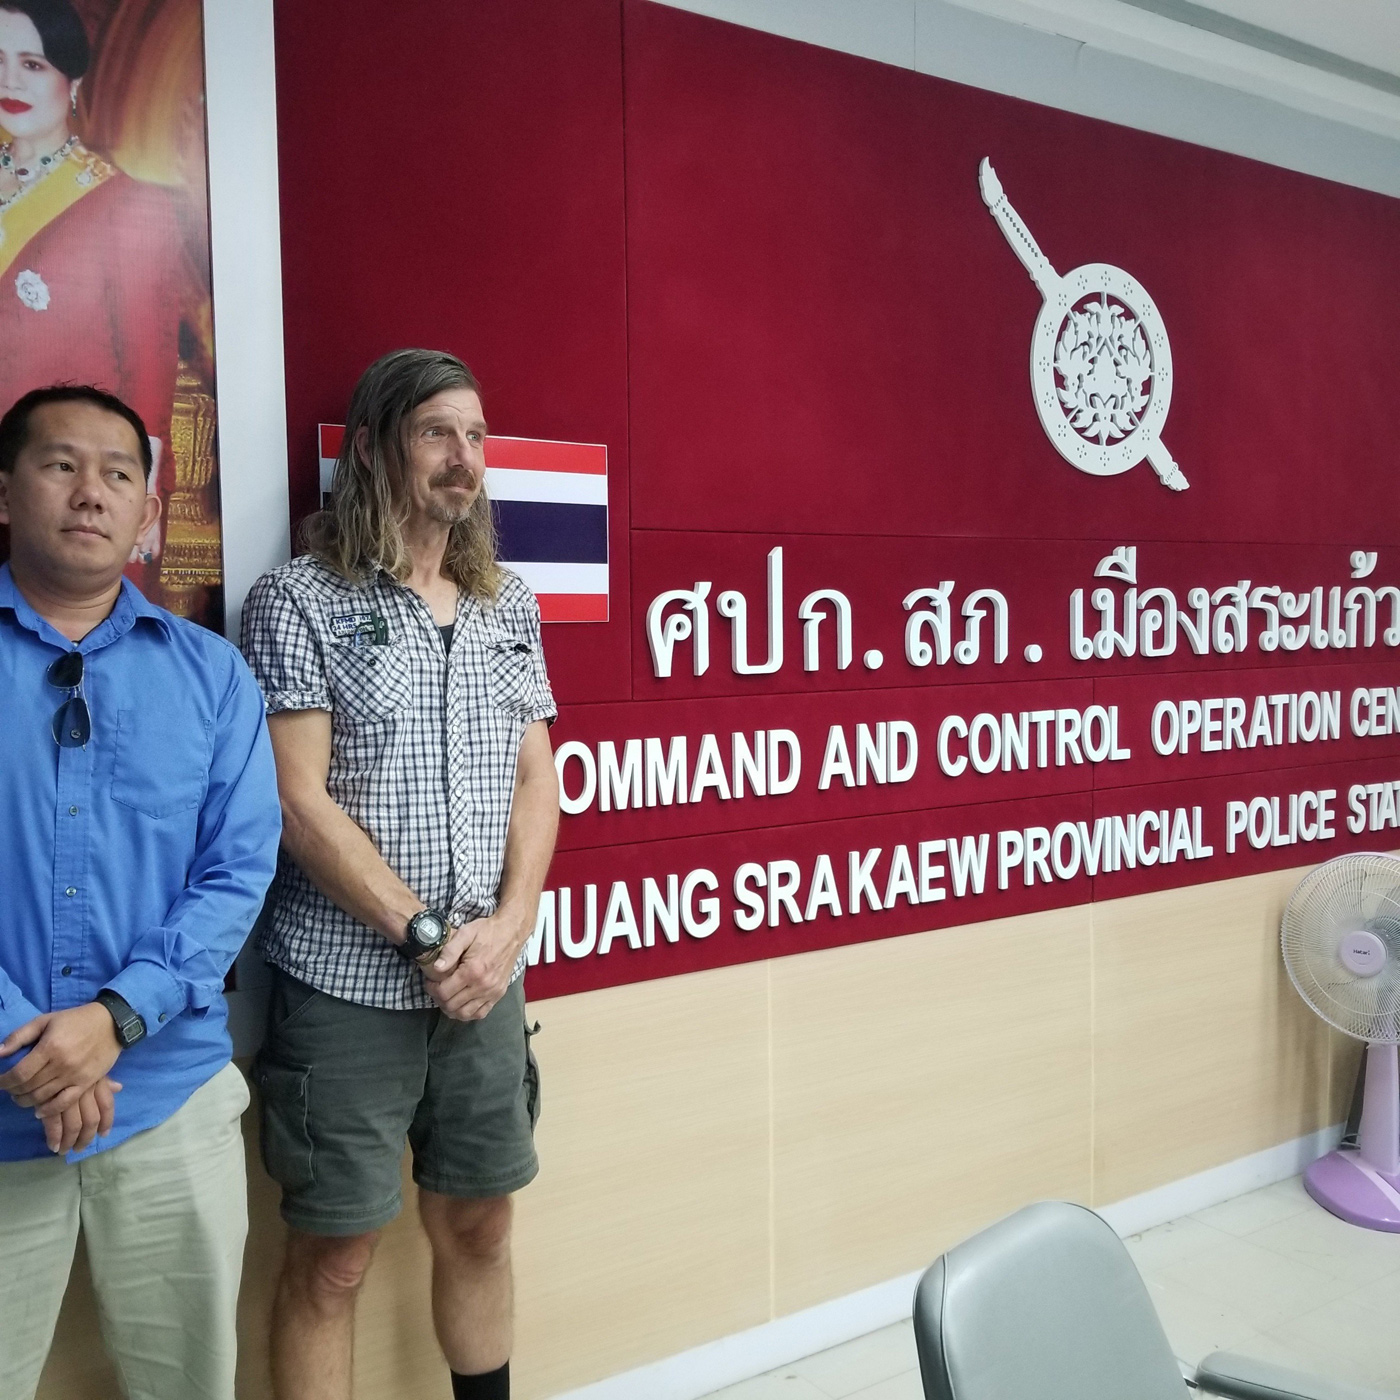 CNRP supporter Daley Uy and his friend Daniel Capka at a Thai police station in November 2019.